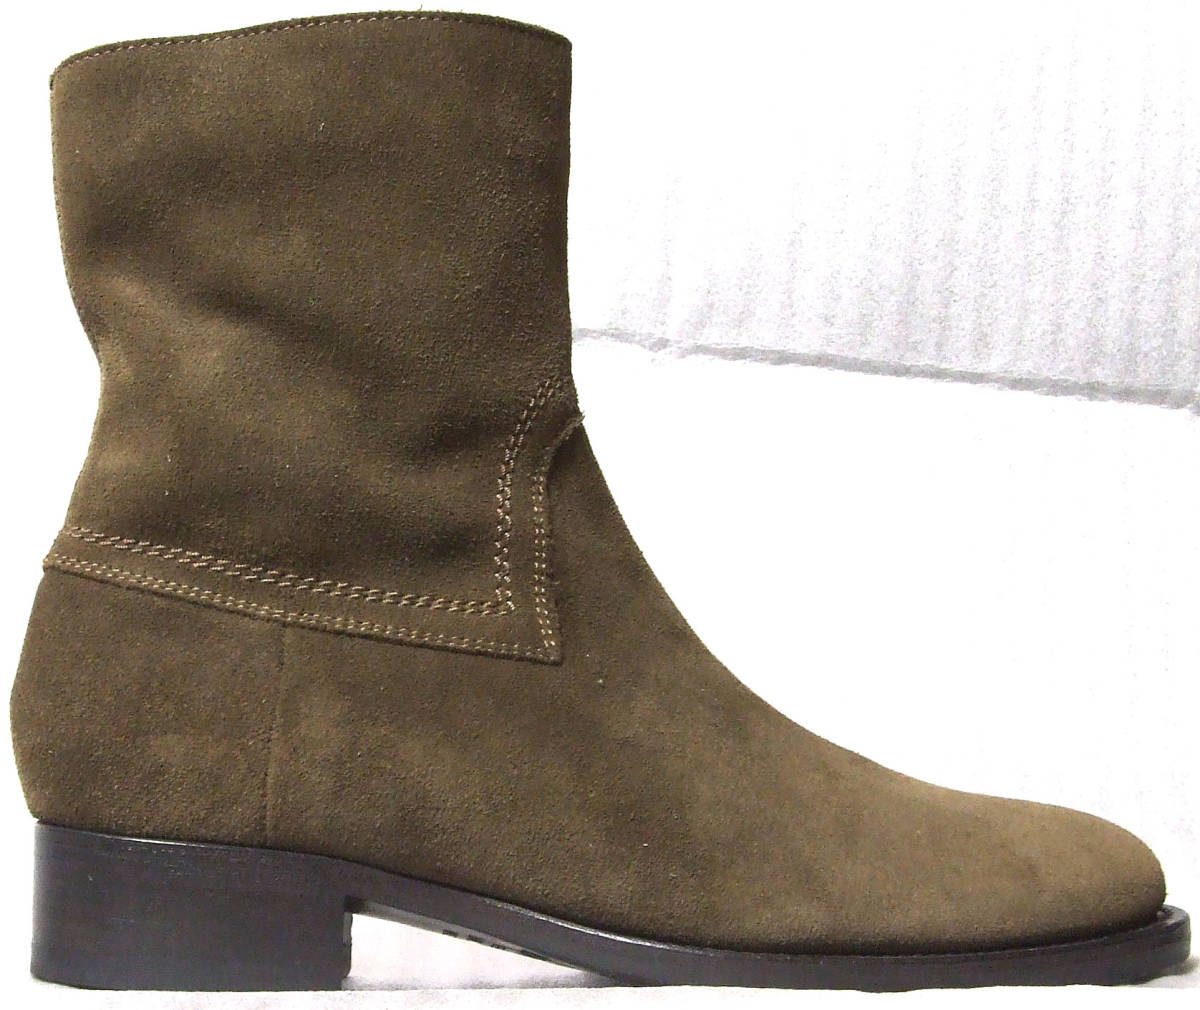 ■BUTTERO-B1120 SIDE ZIP SUEDE BOOT【40：SAND】箱付試着のみ保管新品ブッテロ_画像4